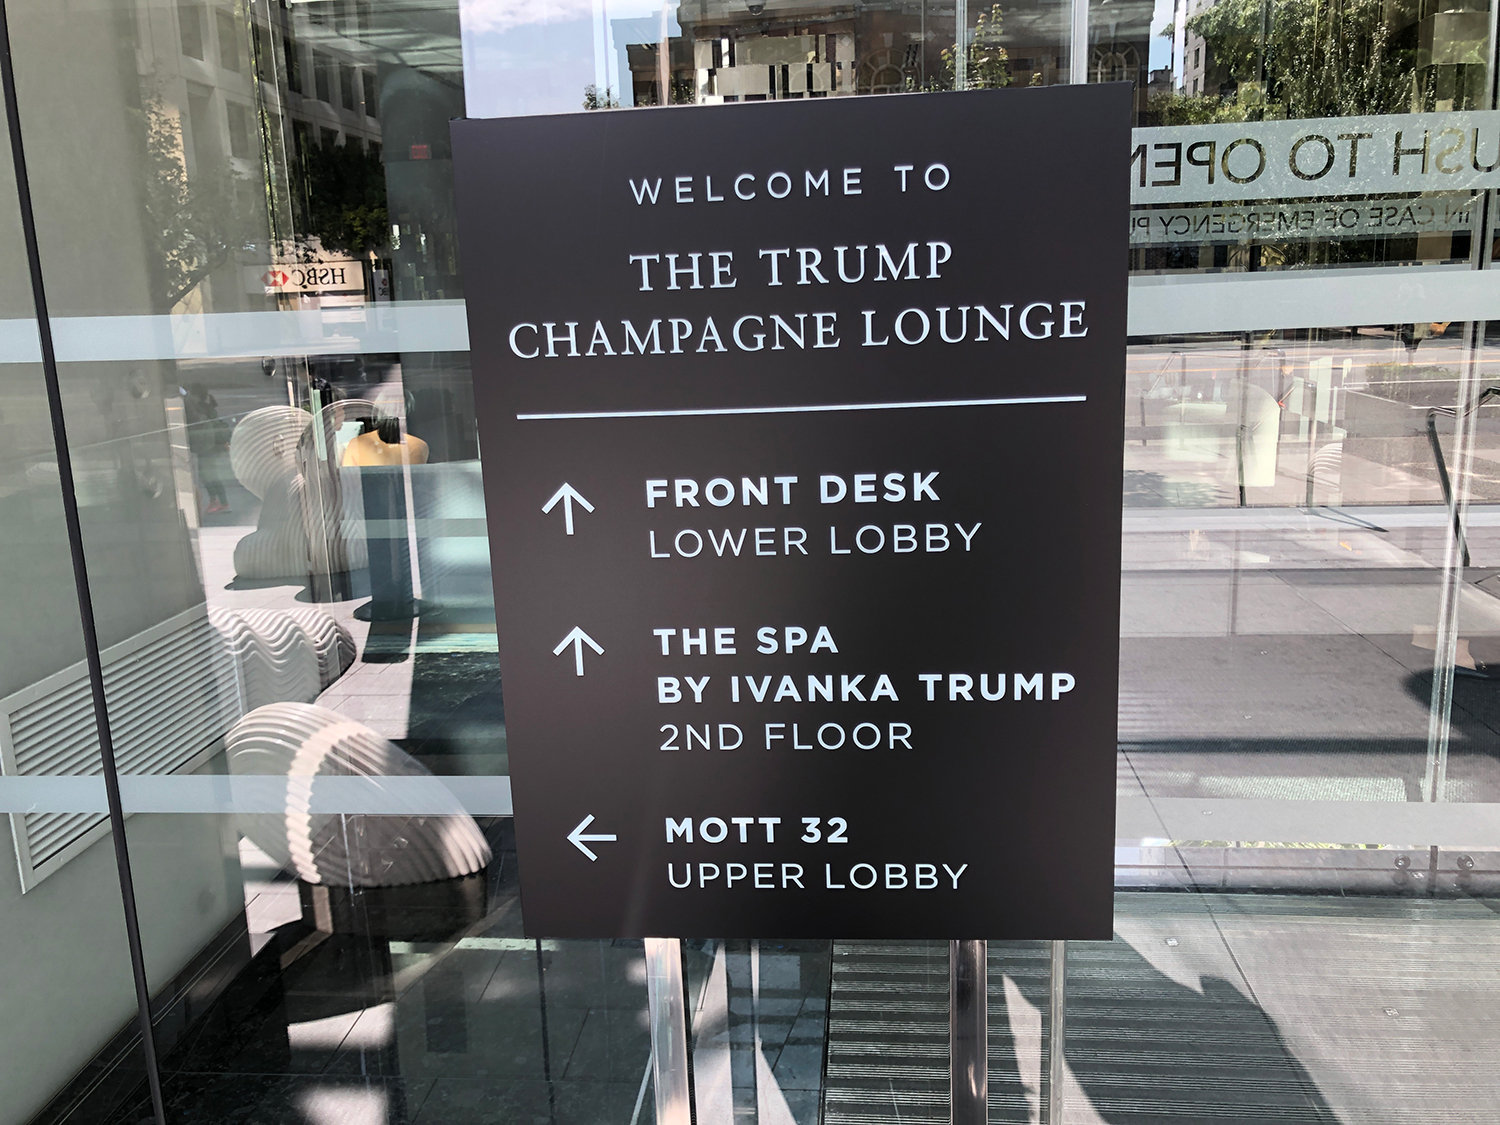 Trump Tower Hotel Champagne Lounge!